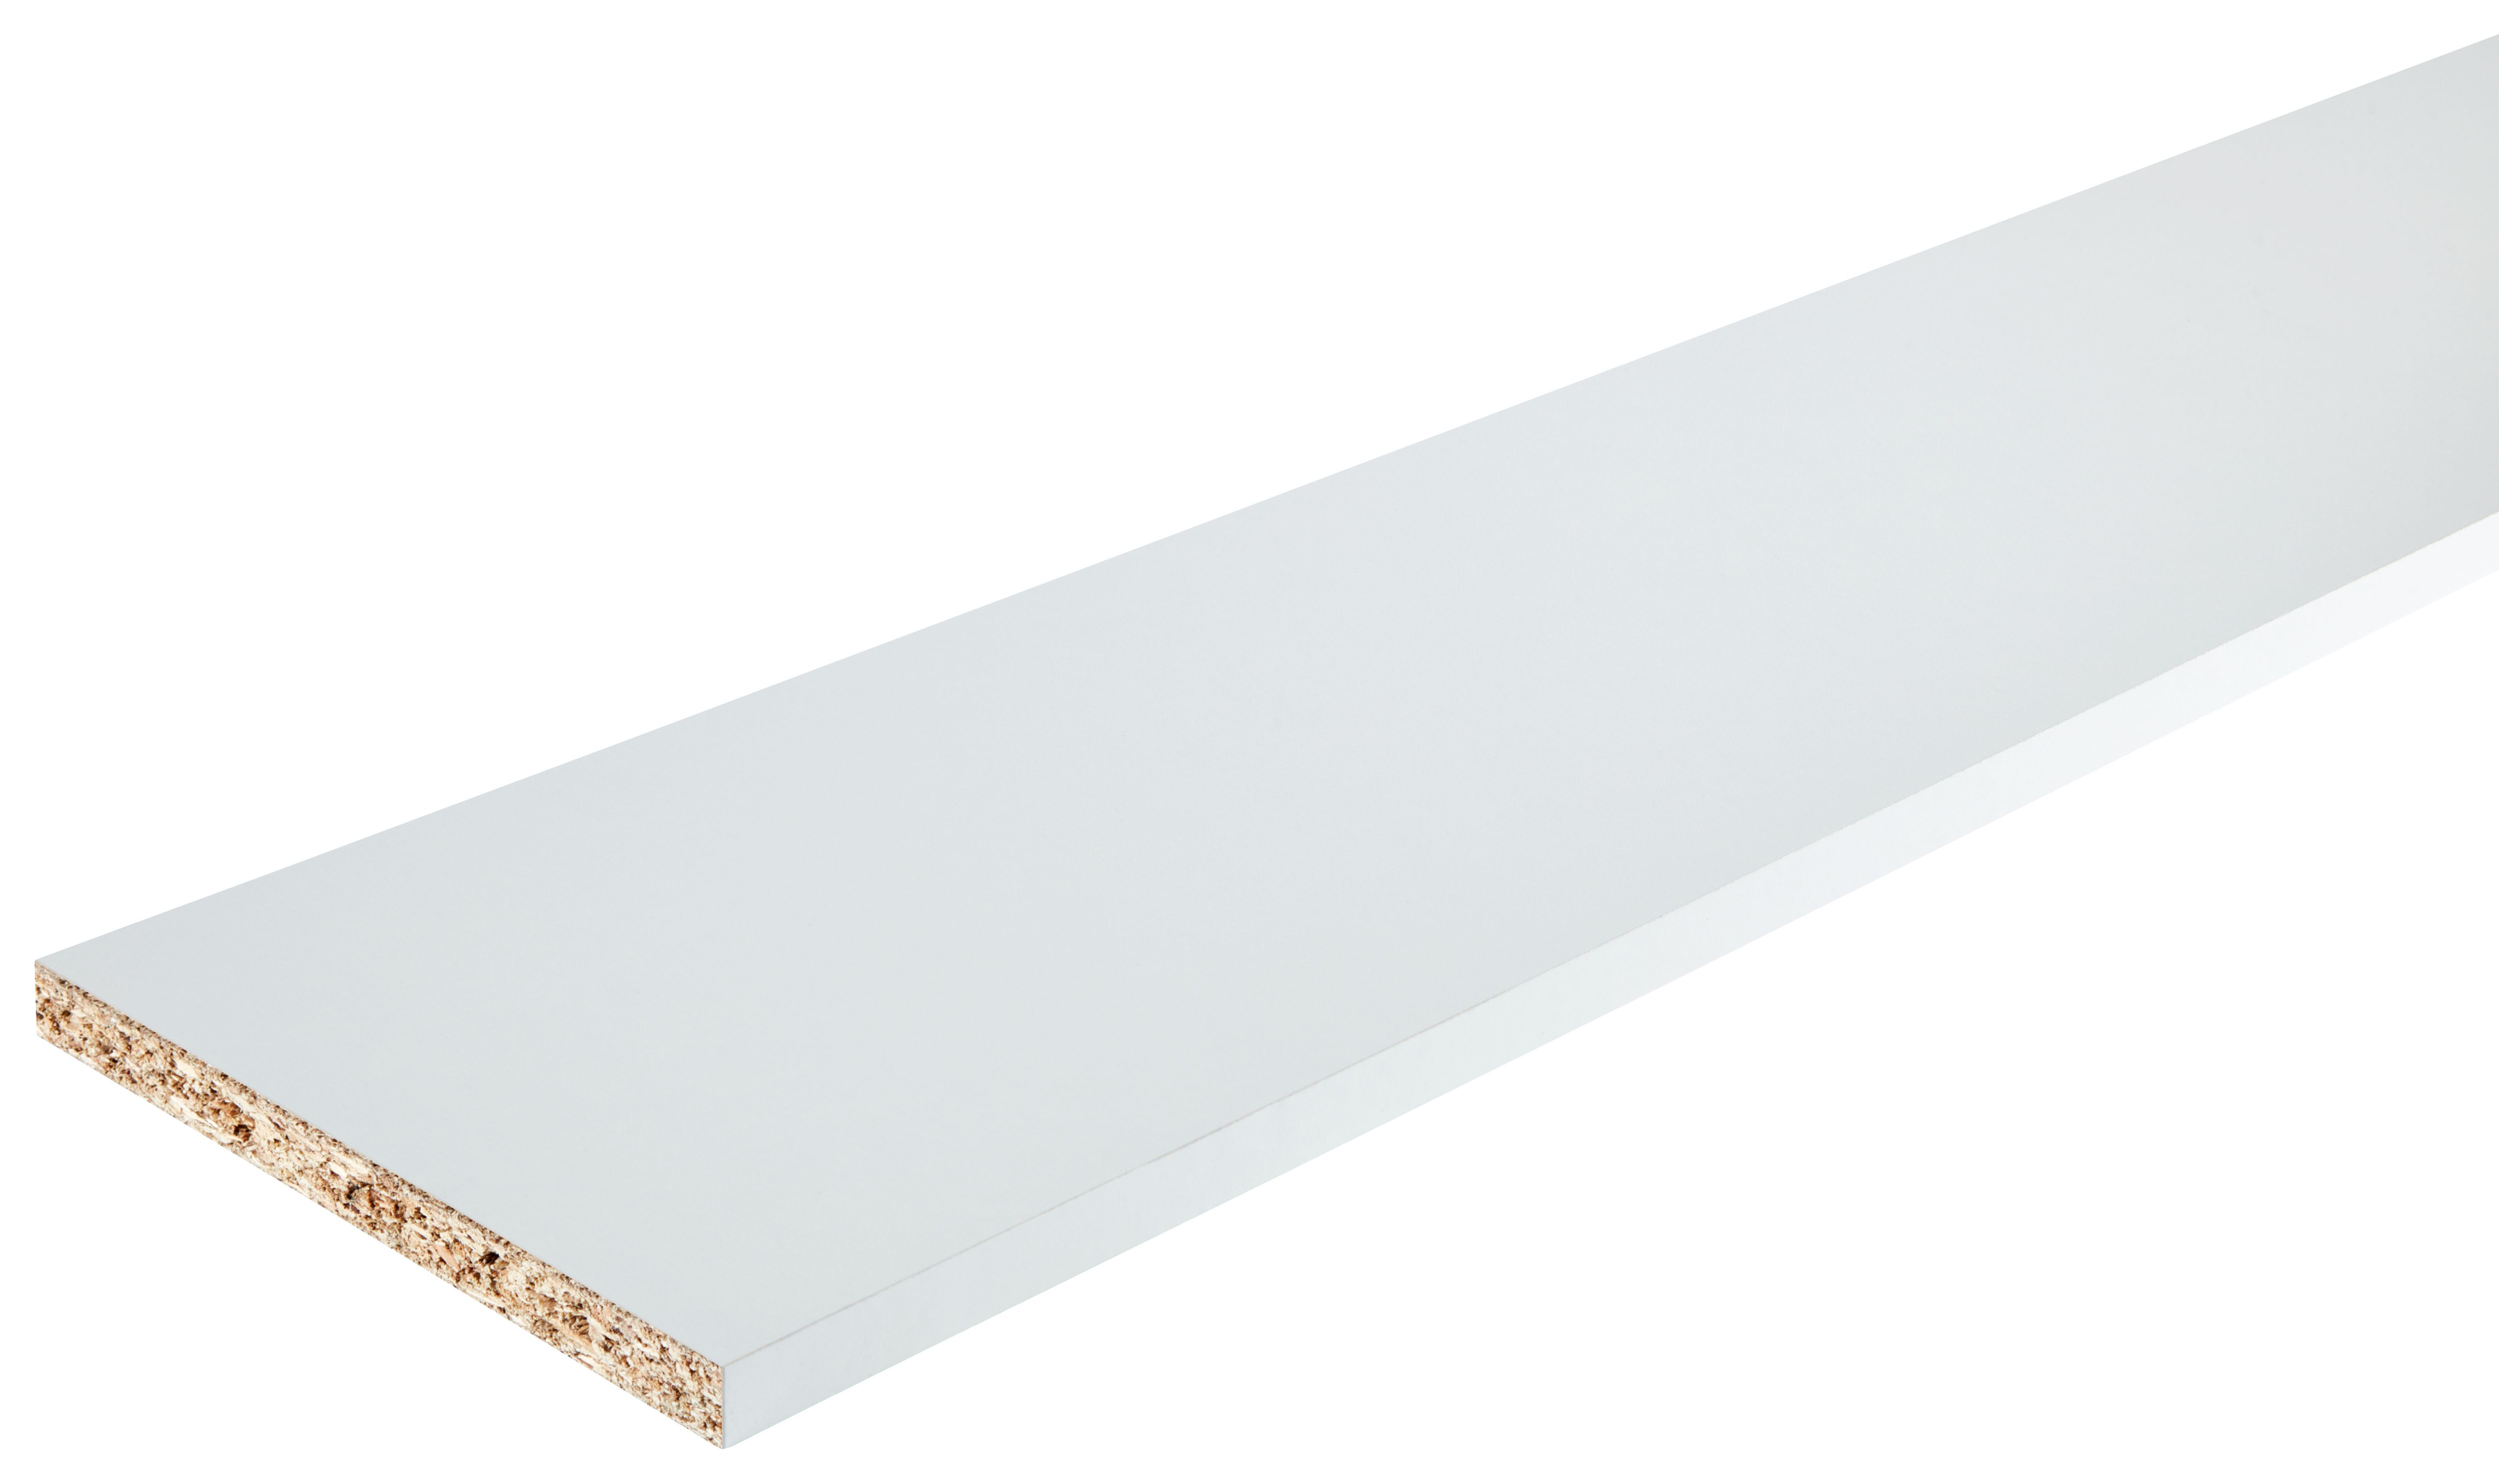 Image of Wickes MFC White Furniture Panel - 18mm x 500mm x 2790mm